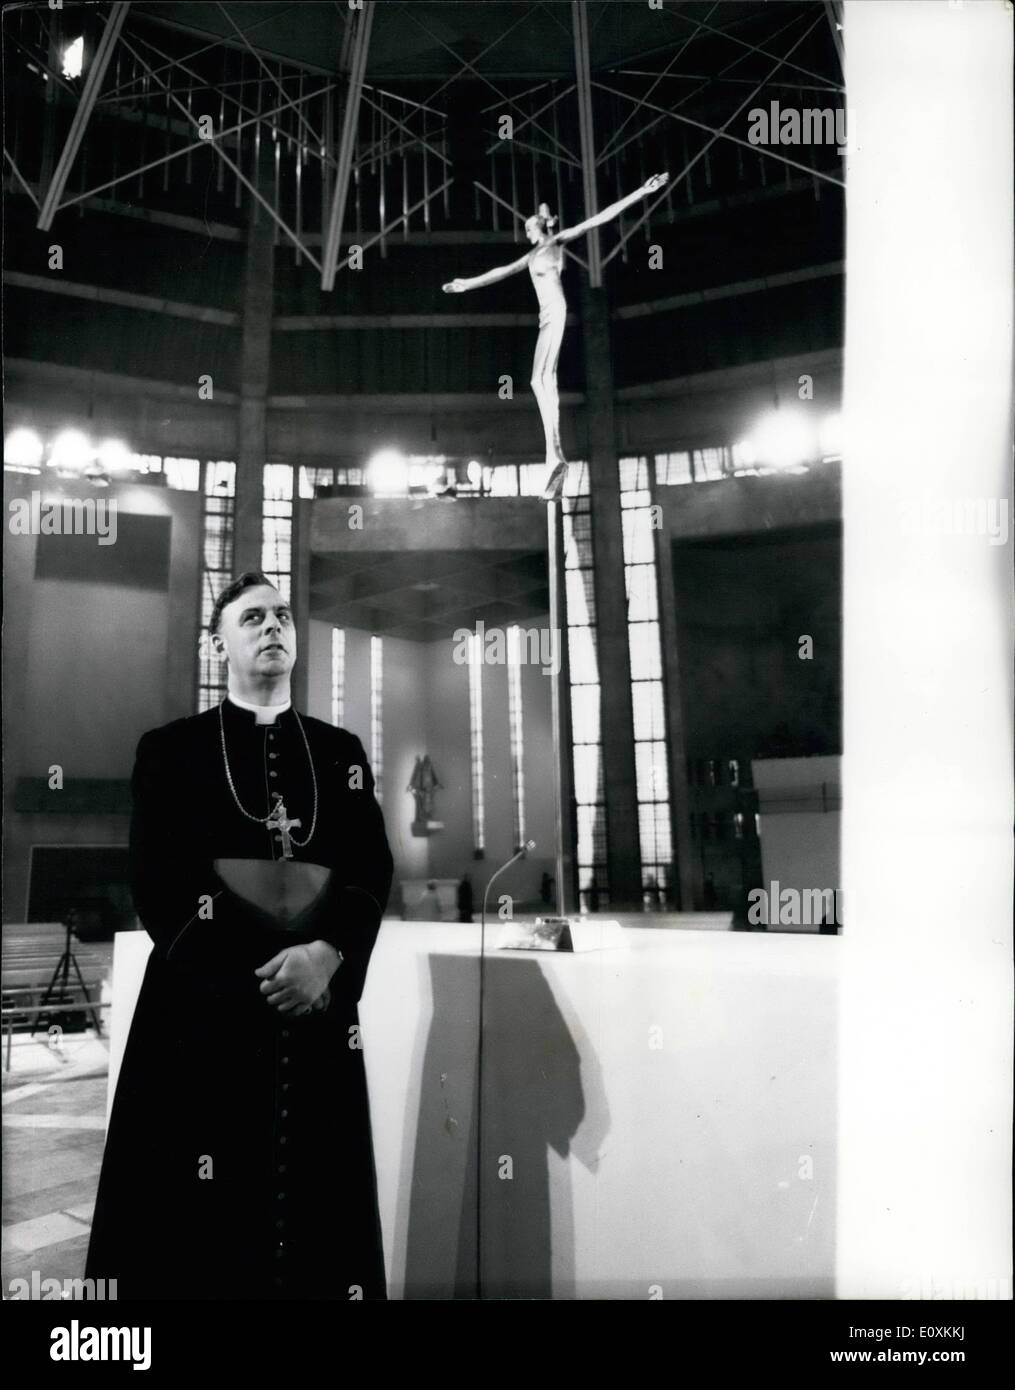 May 05, 1967 - New Liverpool Roman Catholic Cathedral to be consecrated tomorrow: The new Roman Catholic Cathedral, Christ the King, in Liverpool, will be consecrated tomorrow. Photo shows Bishop Harris, auxiliary Bishop of Liverpool standing by the High Altar, with a bronze crucifix-sculptured by Elizabeth Frank, of London. Stock Photo